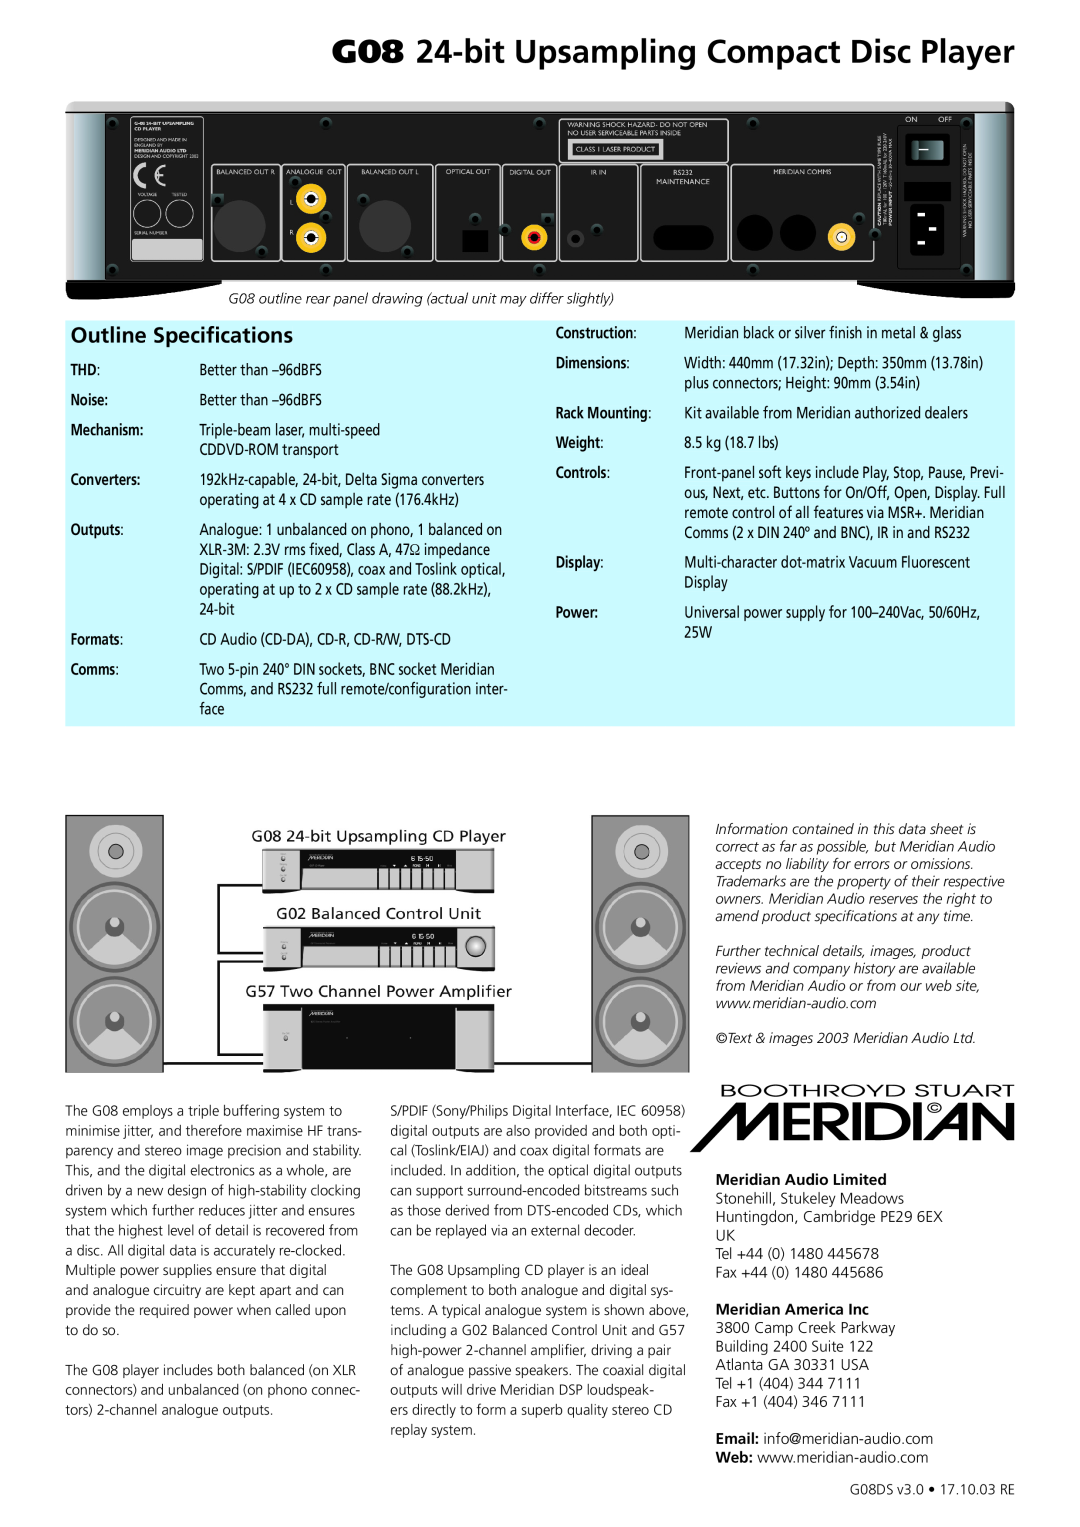 Meridian Audio manual G08 24-bitUpsampling Compact Disc Player, Outline Specifications 